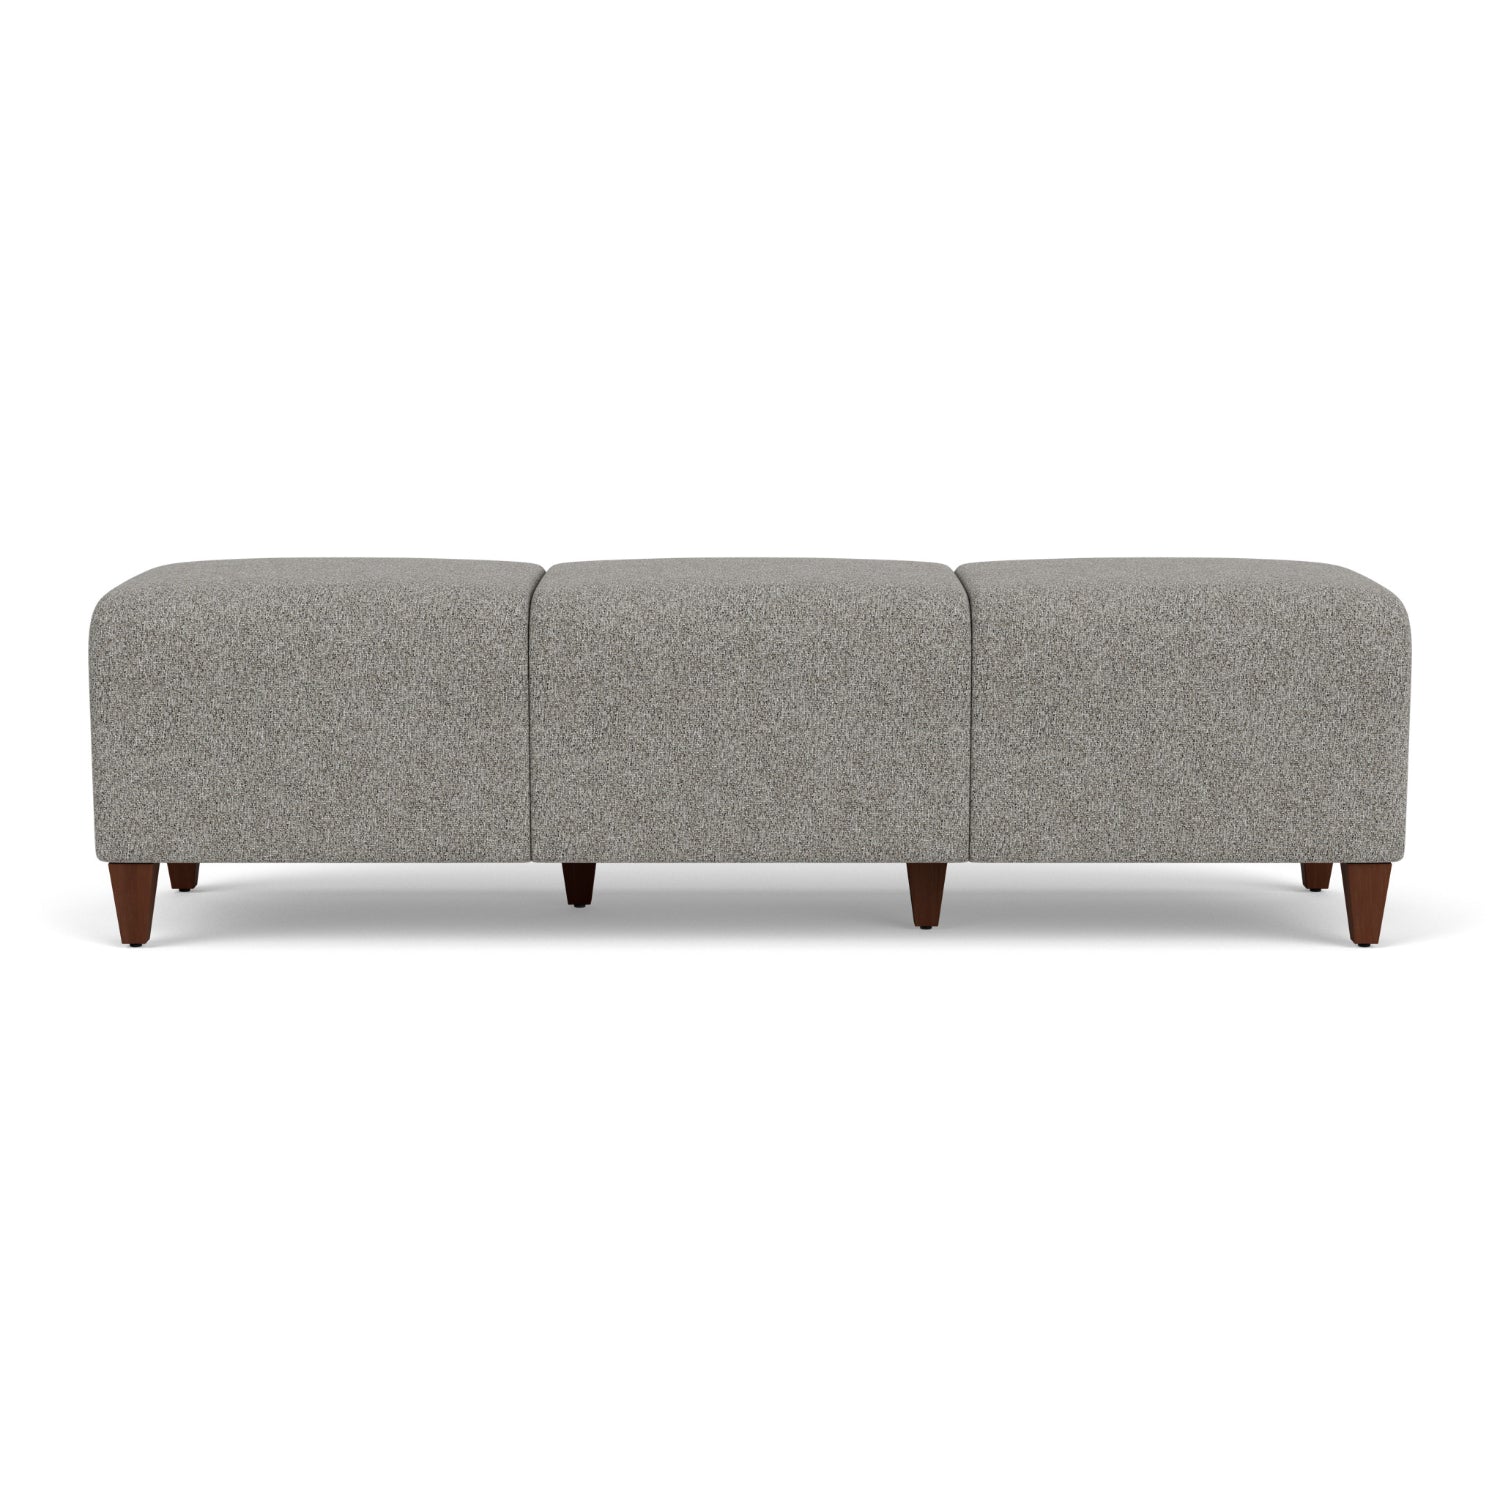 Siena Collection Reception Seating, 3-Seat Bench, Standard Fabric Upholstery, FREE SHIPPING